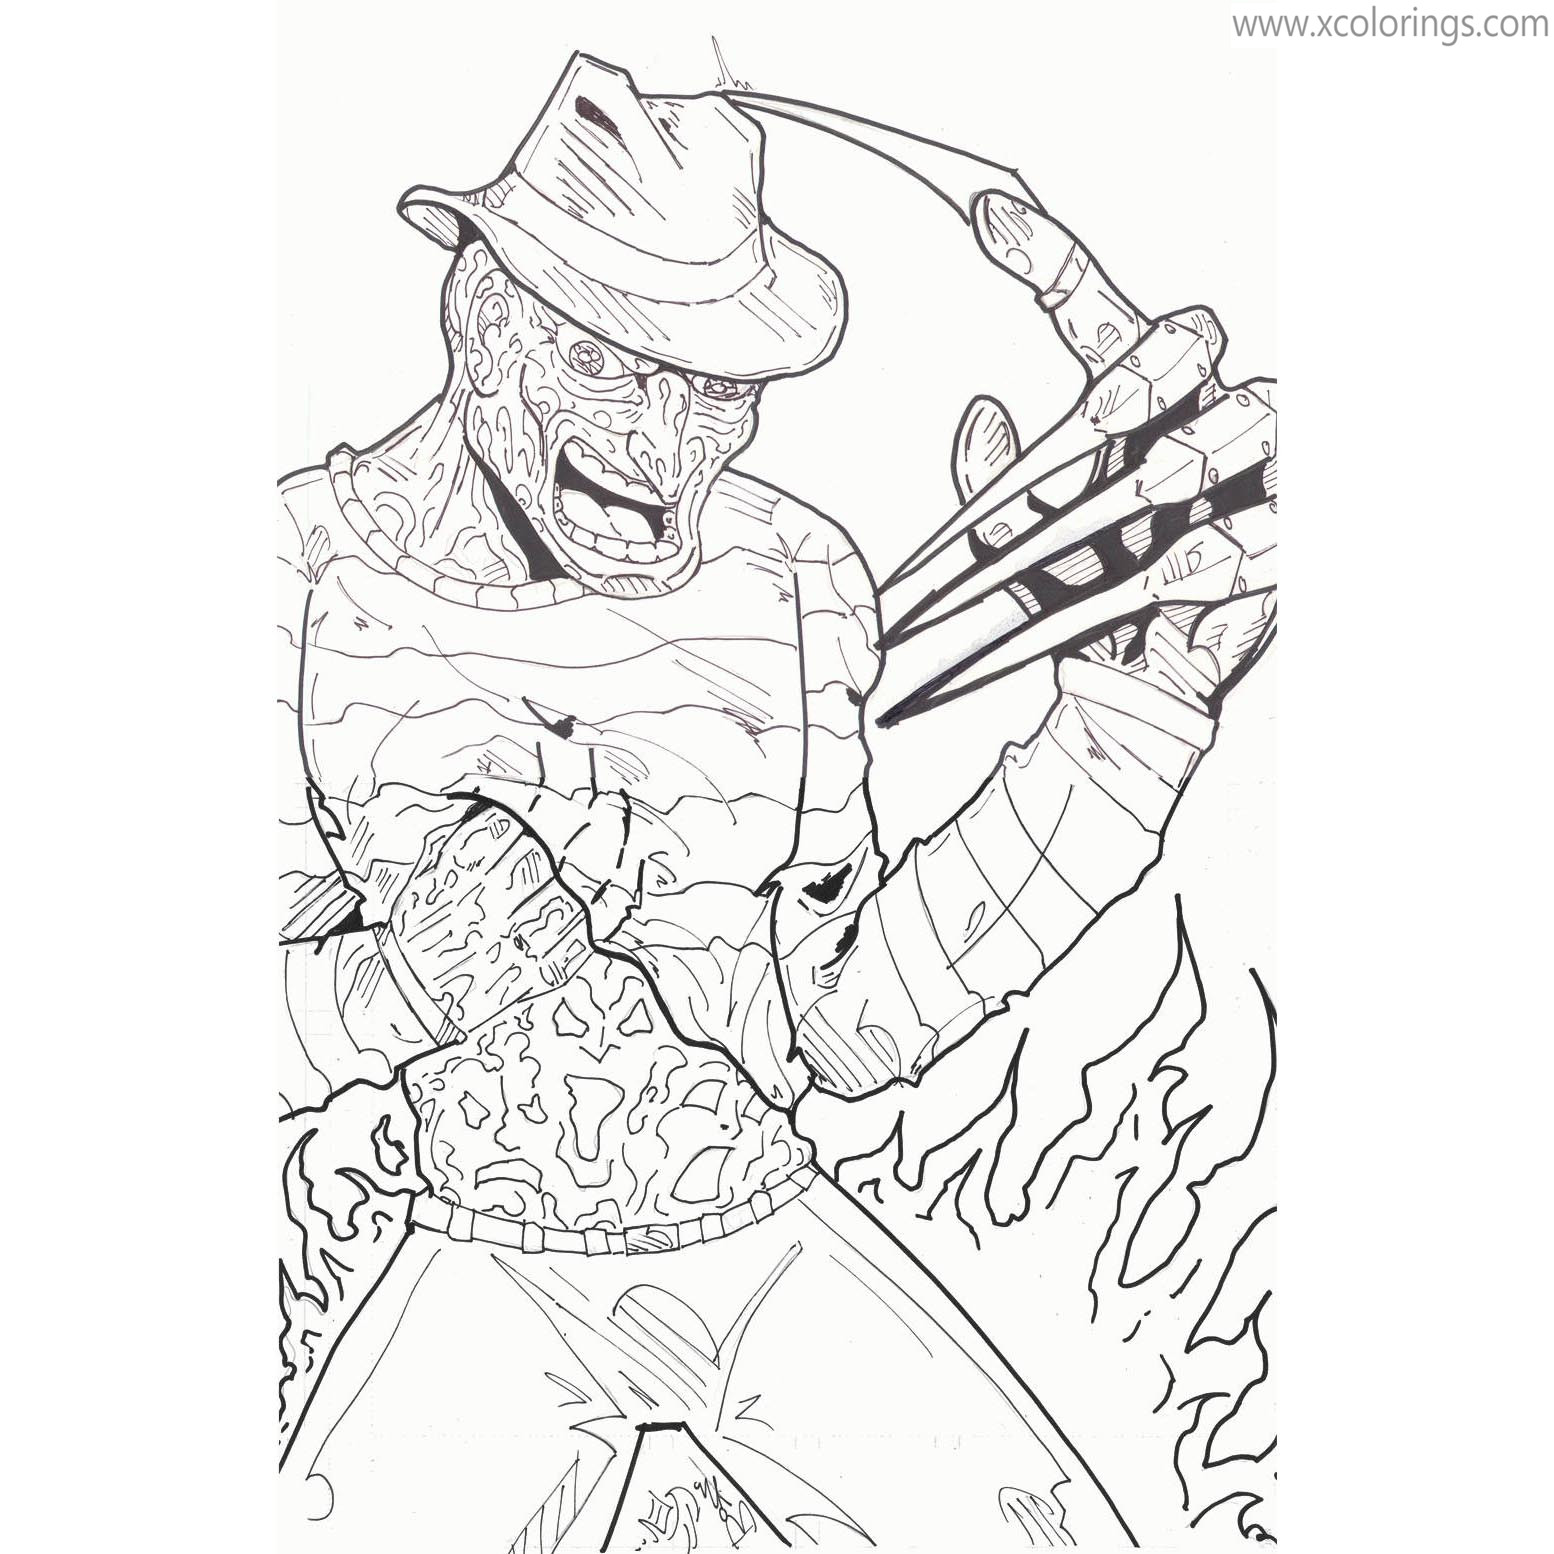 Free Freddy Krueger Coloring Pages for Halloween printable